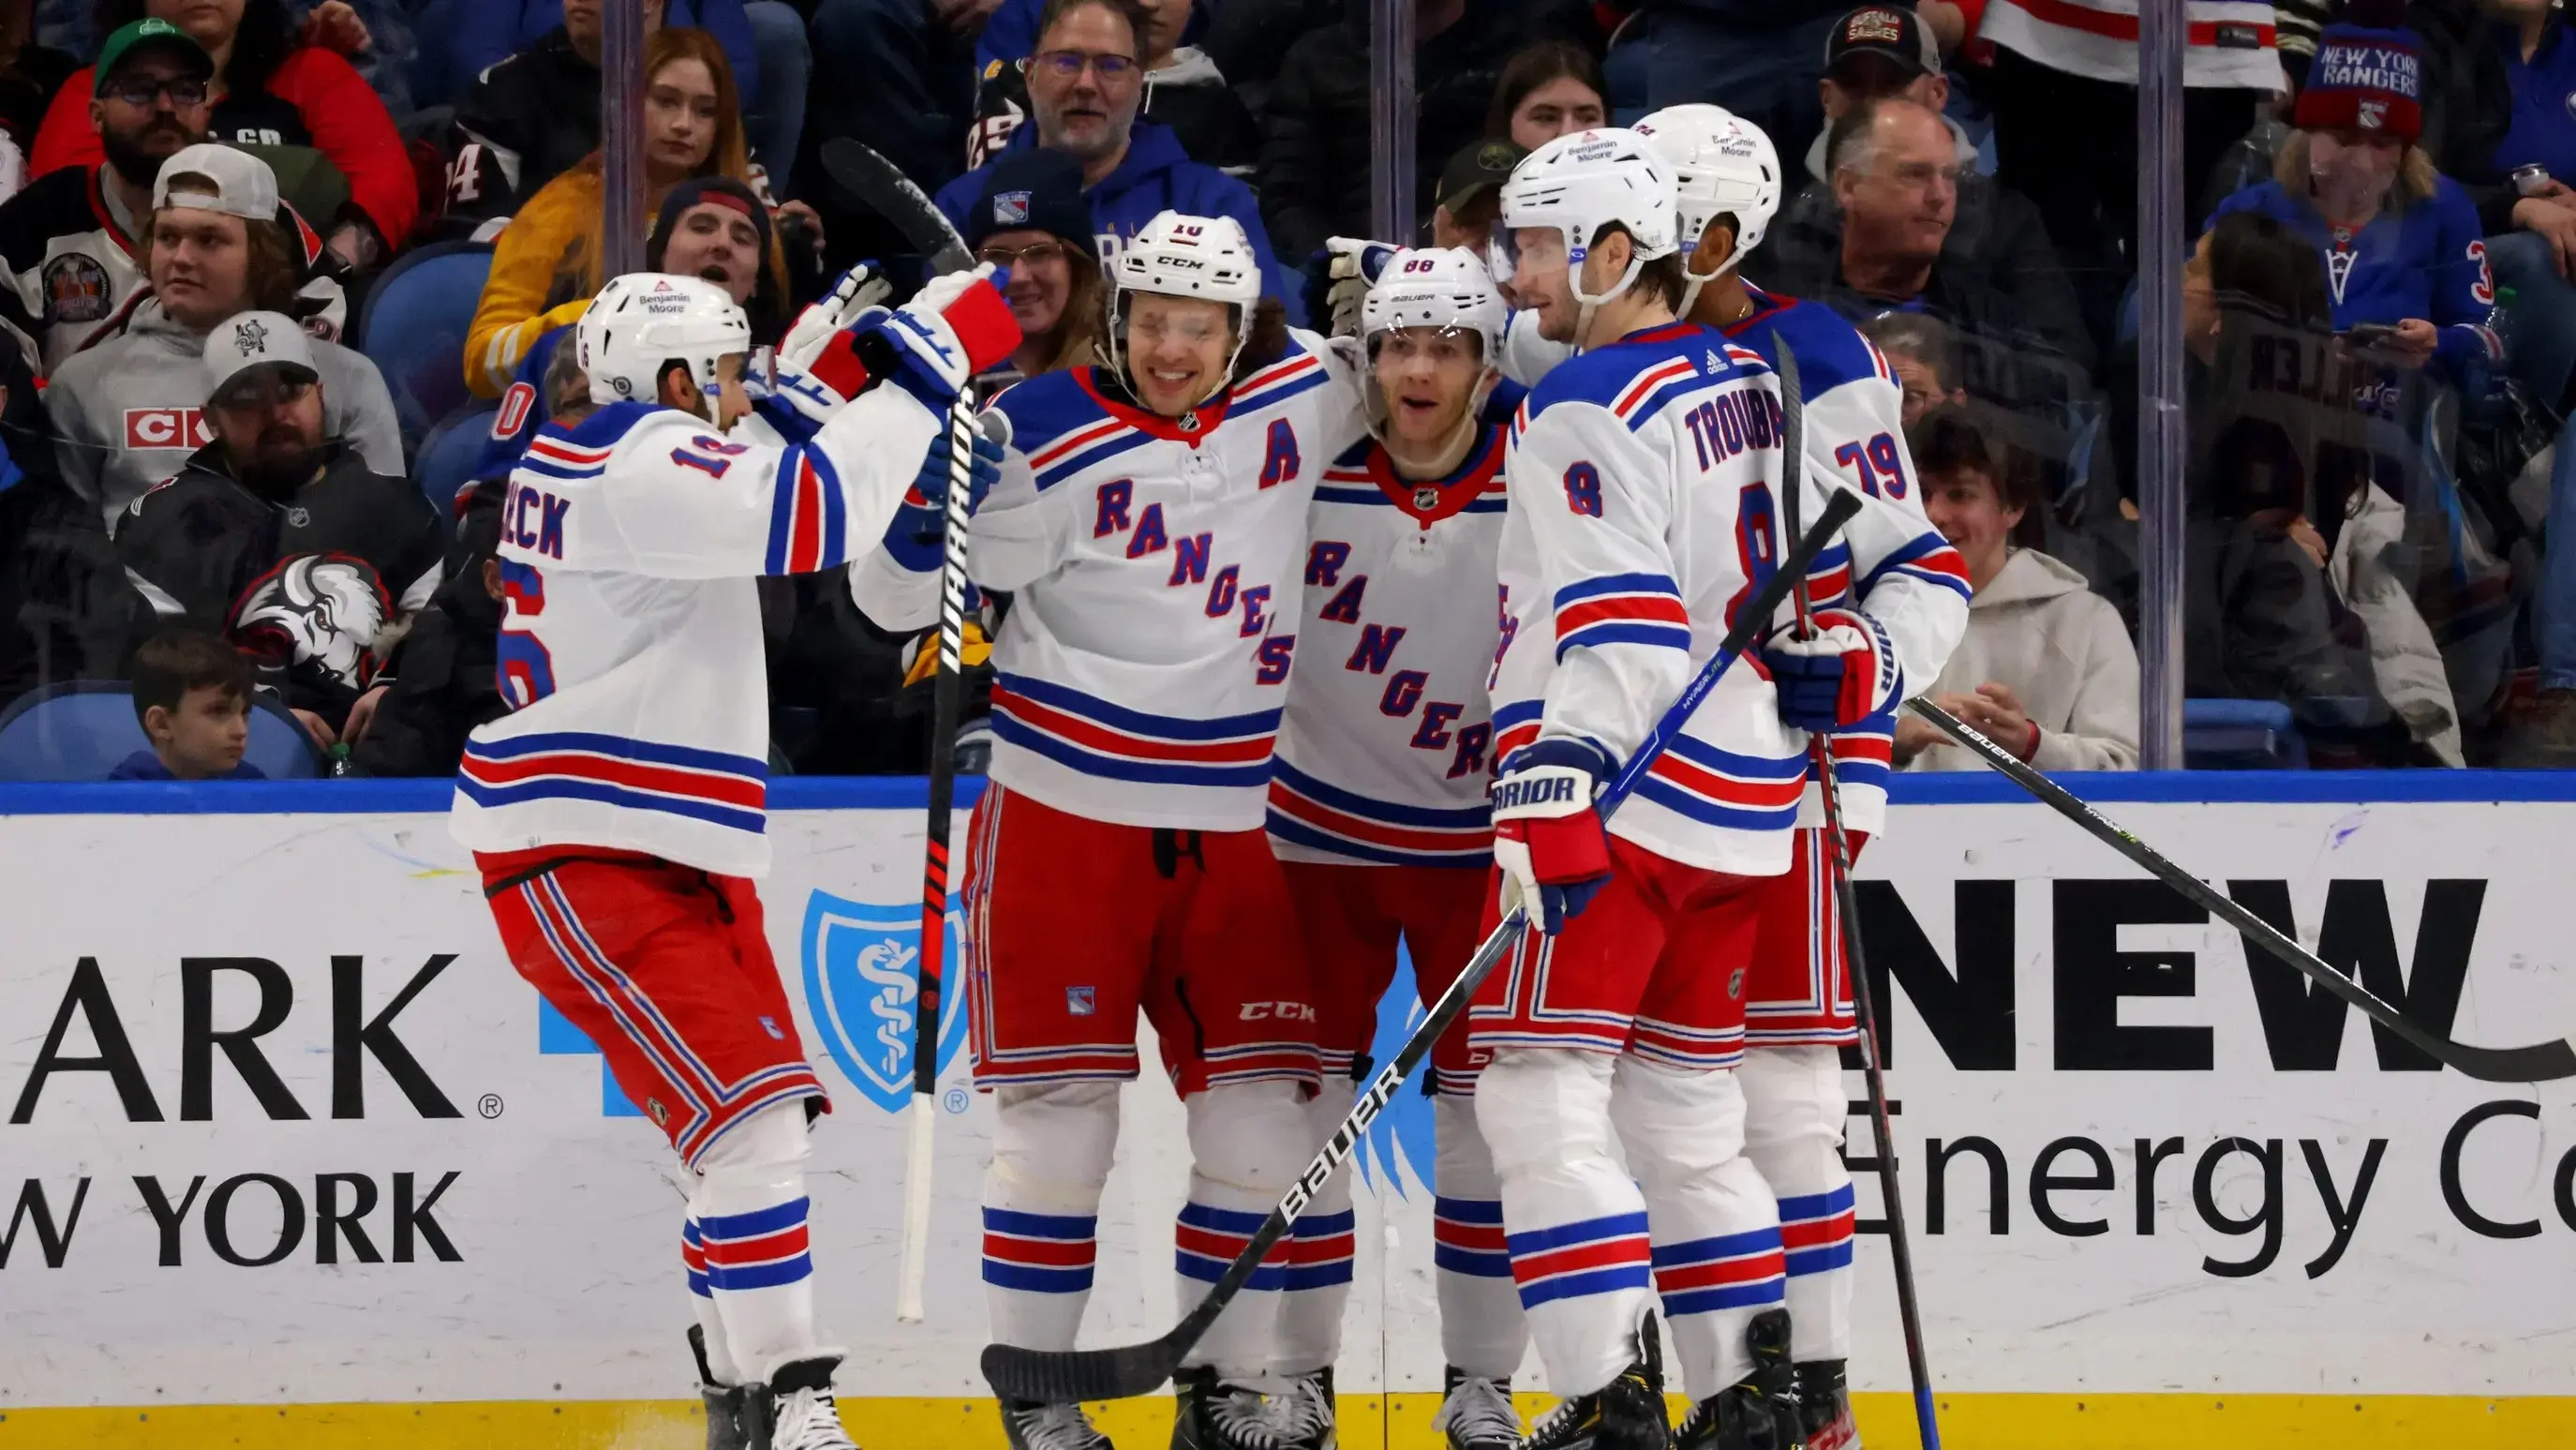 Mar 11, 2023; Buffalo, New York, USA; New York Rangers right wing Patrick Kane (88) celebrates his goal with teammates during the second period against the Buffalo Sabres at KeyBank Center. / Timothy T. Ludwig-USA TODAY Sports